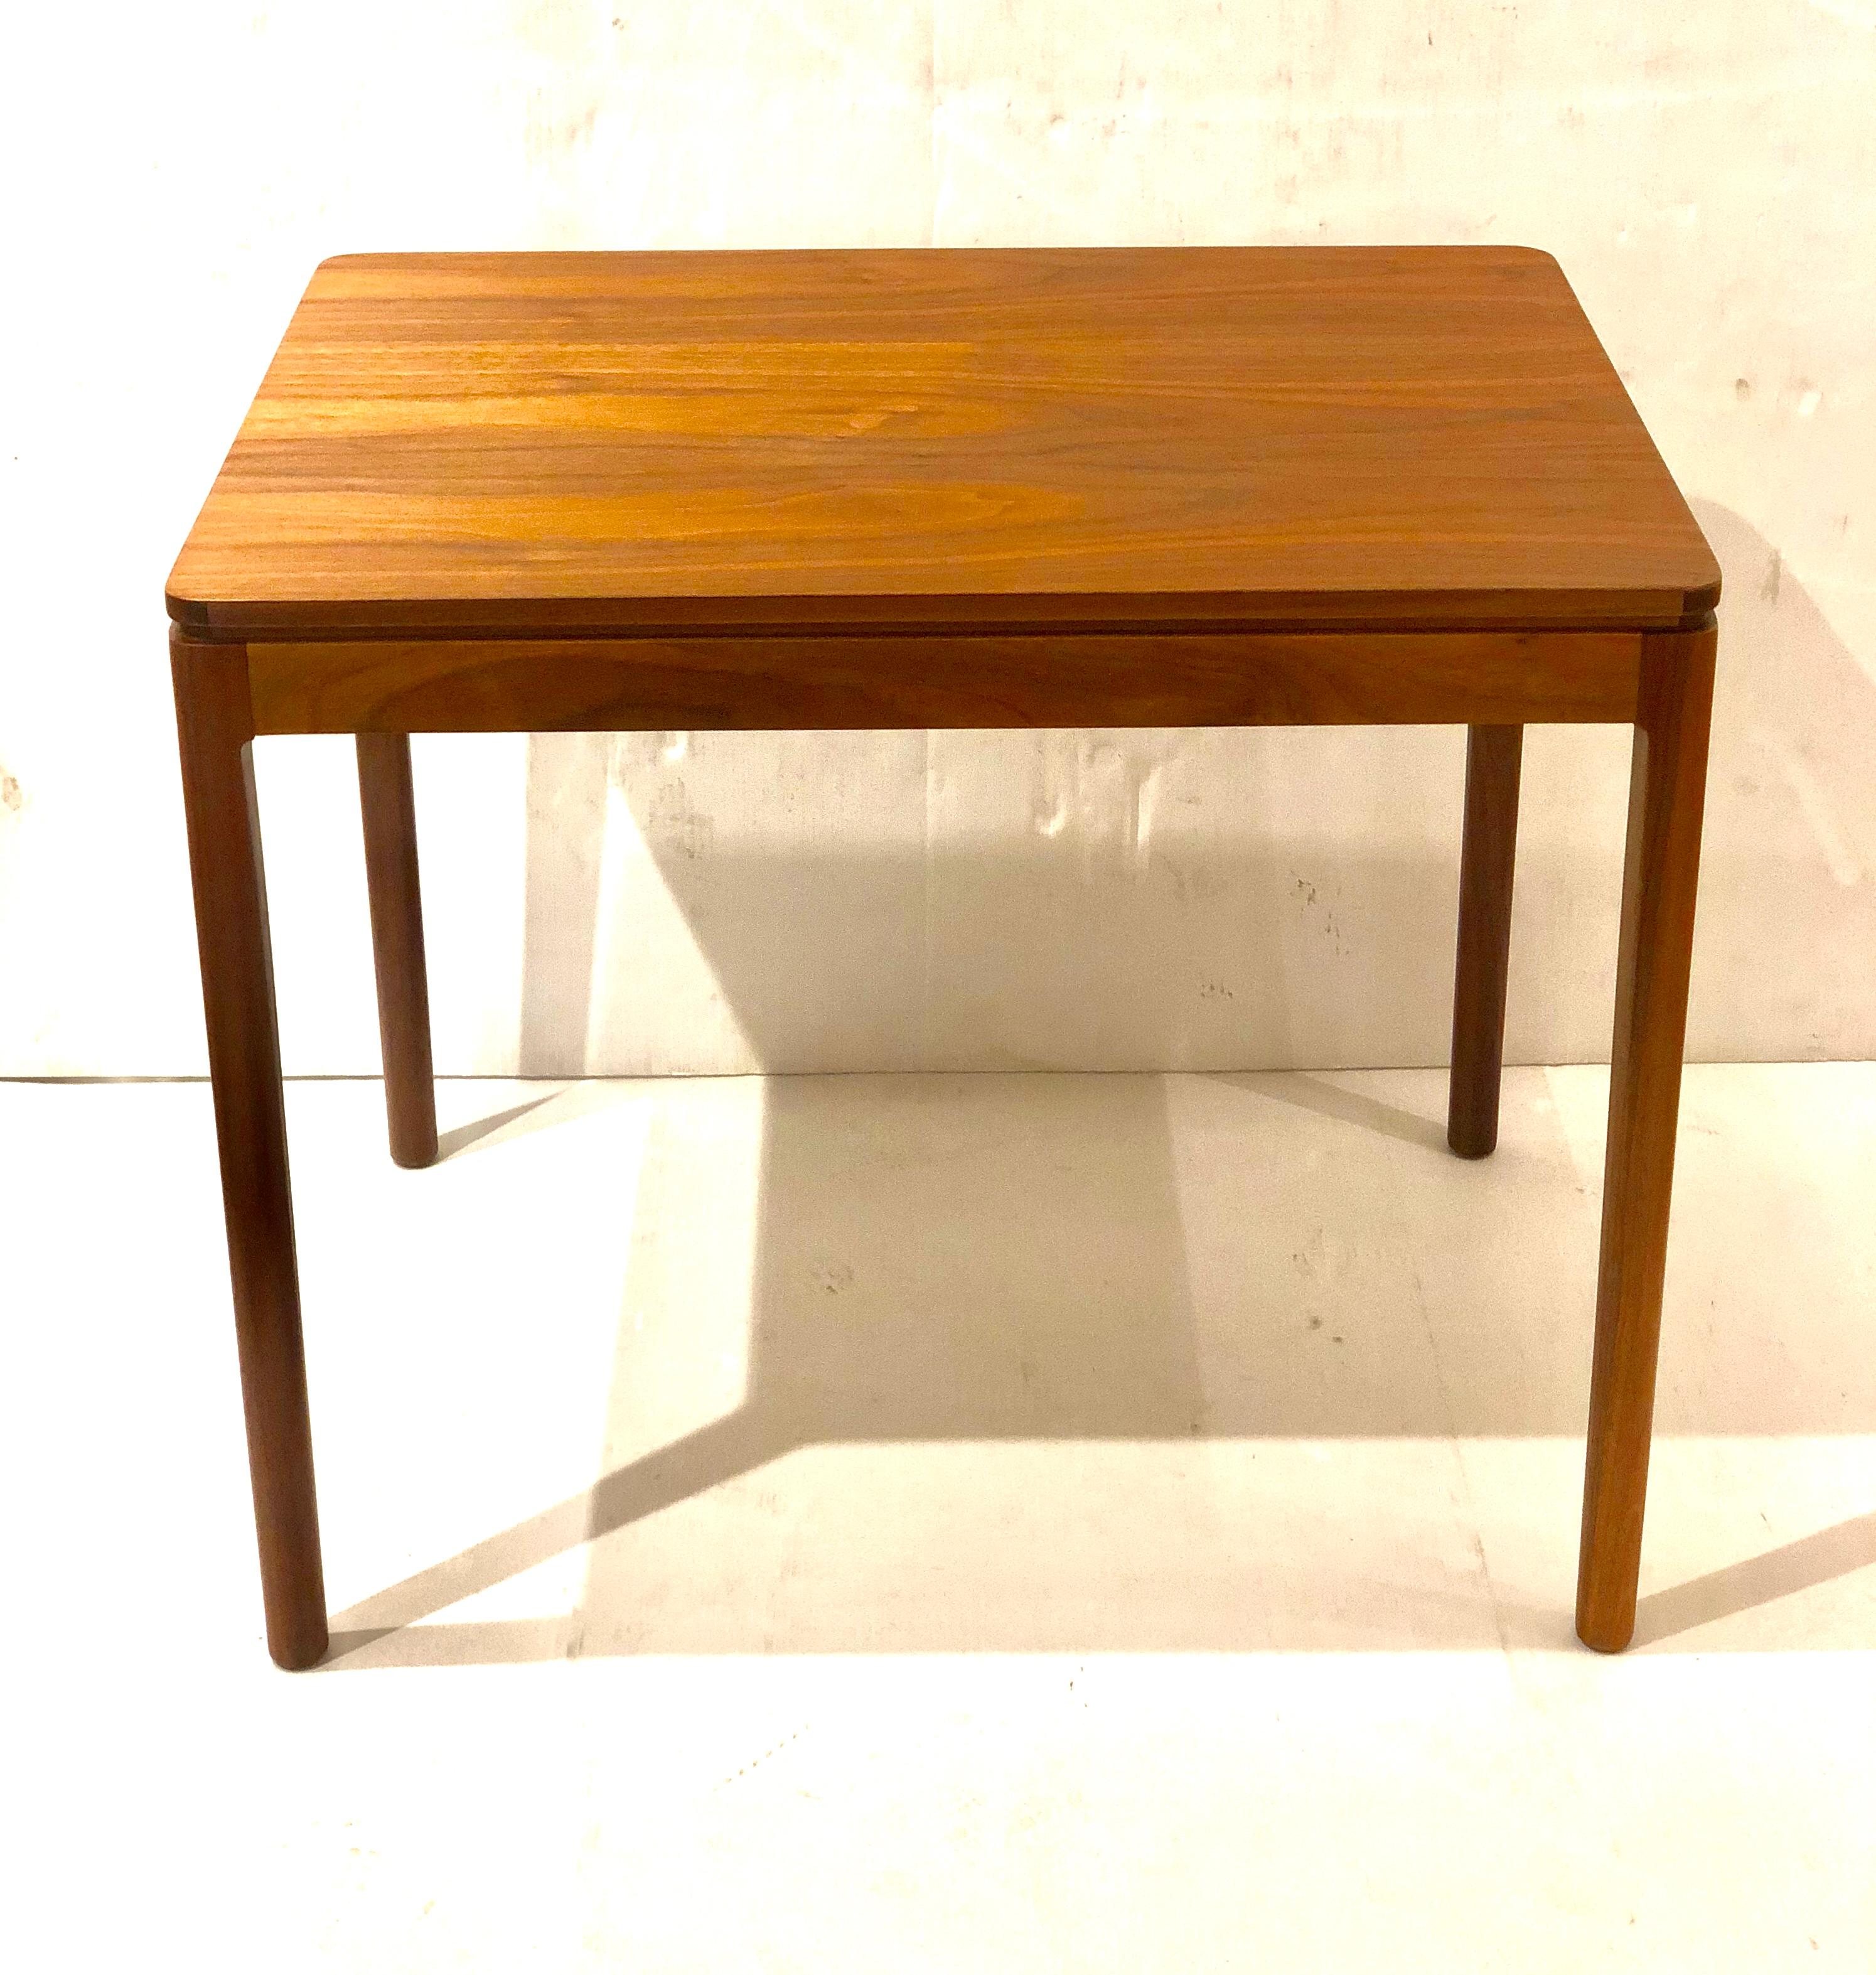 Beautiful set of walnut tables by Drexel Declaration model, circa 1950s freshly refinished in beautiful condition, solid and sturdy, stamped under the table, Large table: 20 1/4